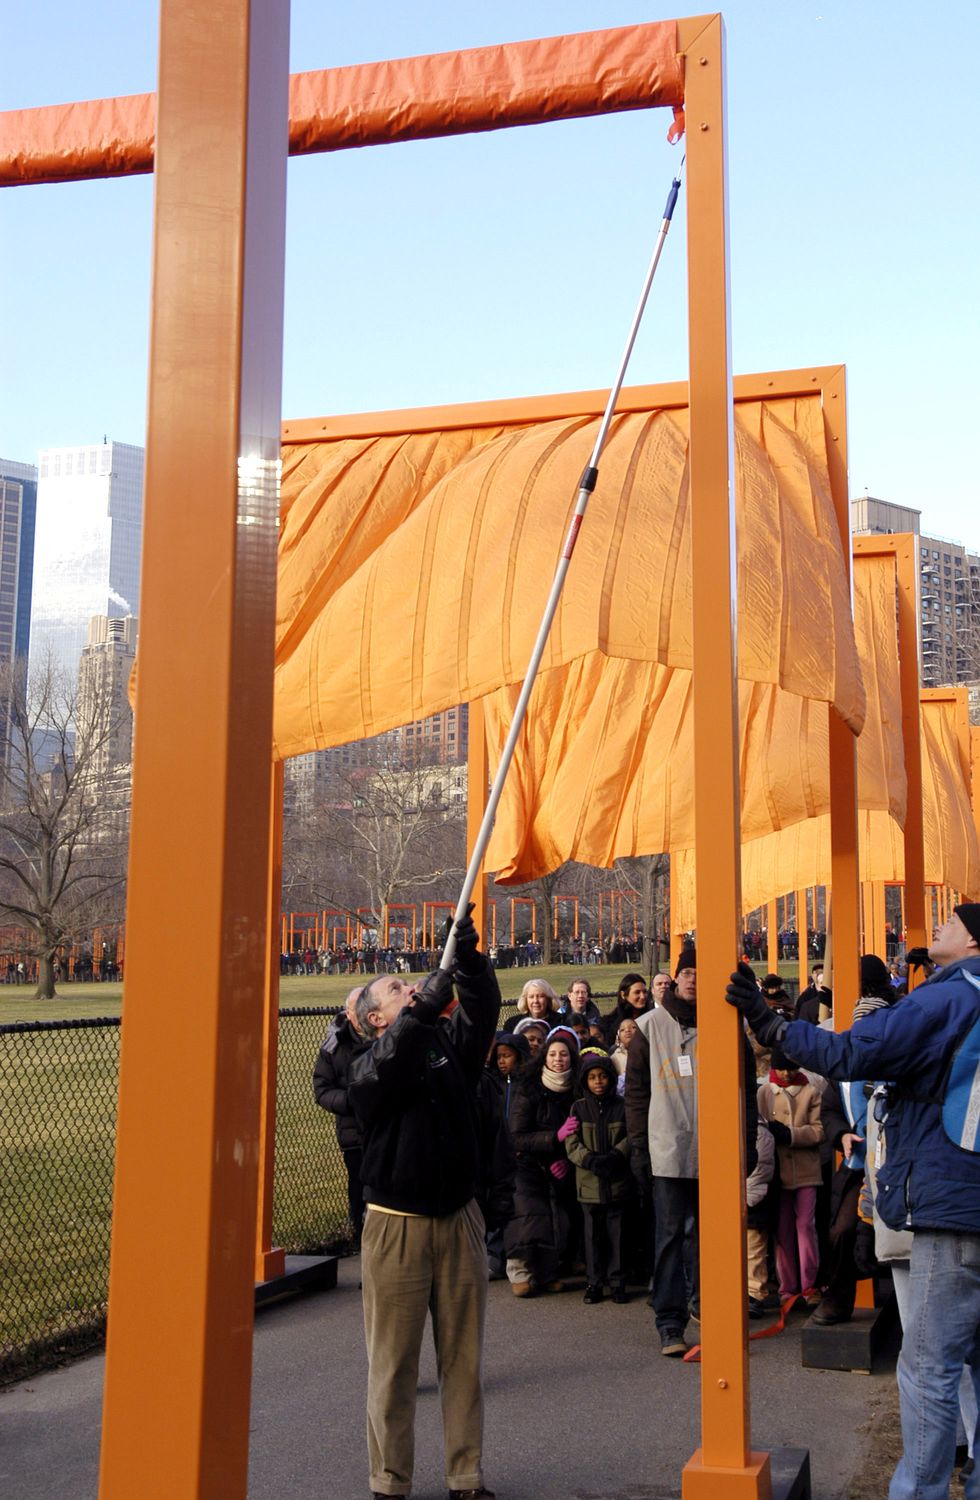 mayor michael bloomberg unfurls "the gates" by christo and jeanne claude in central park february 12, 2005